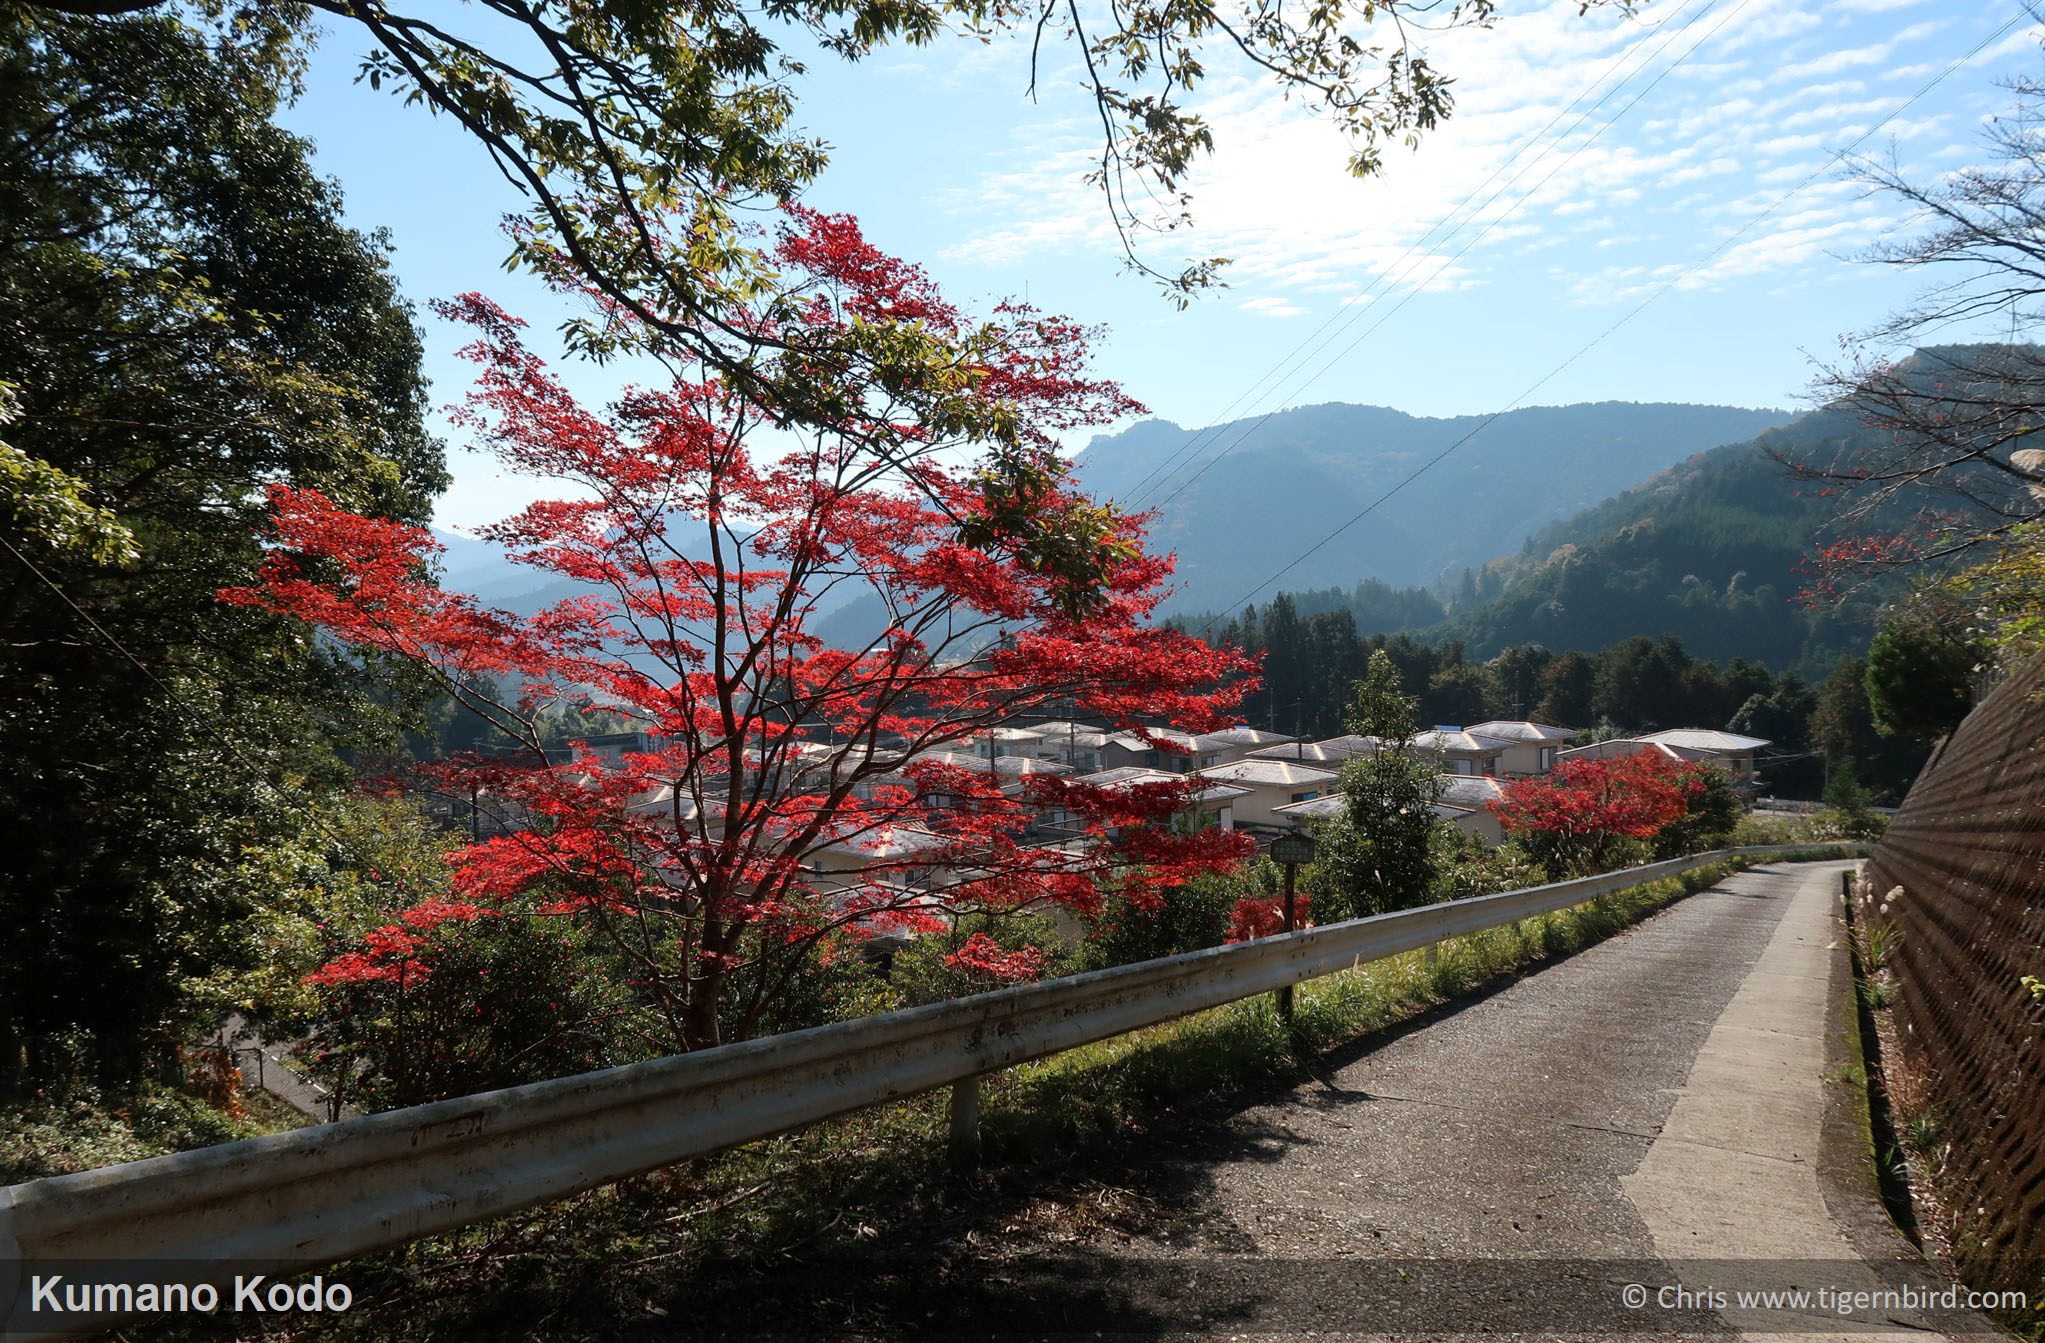 Bright red leaves of tree above path down to town along the Kumano Kodo in Japan